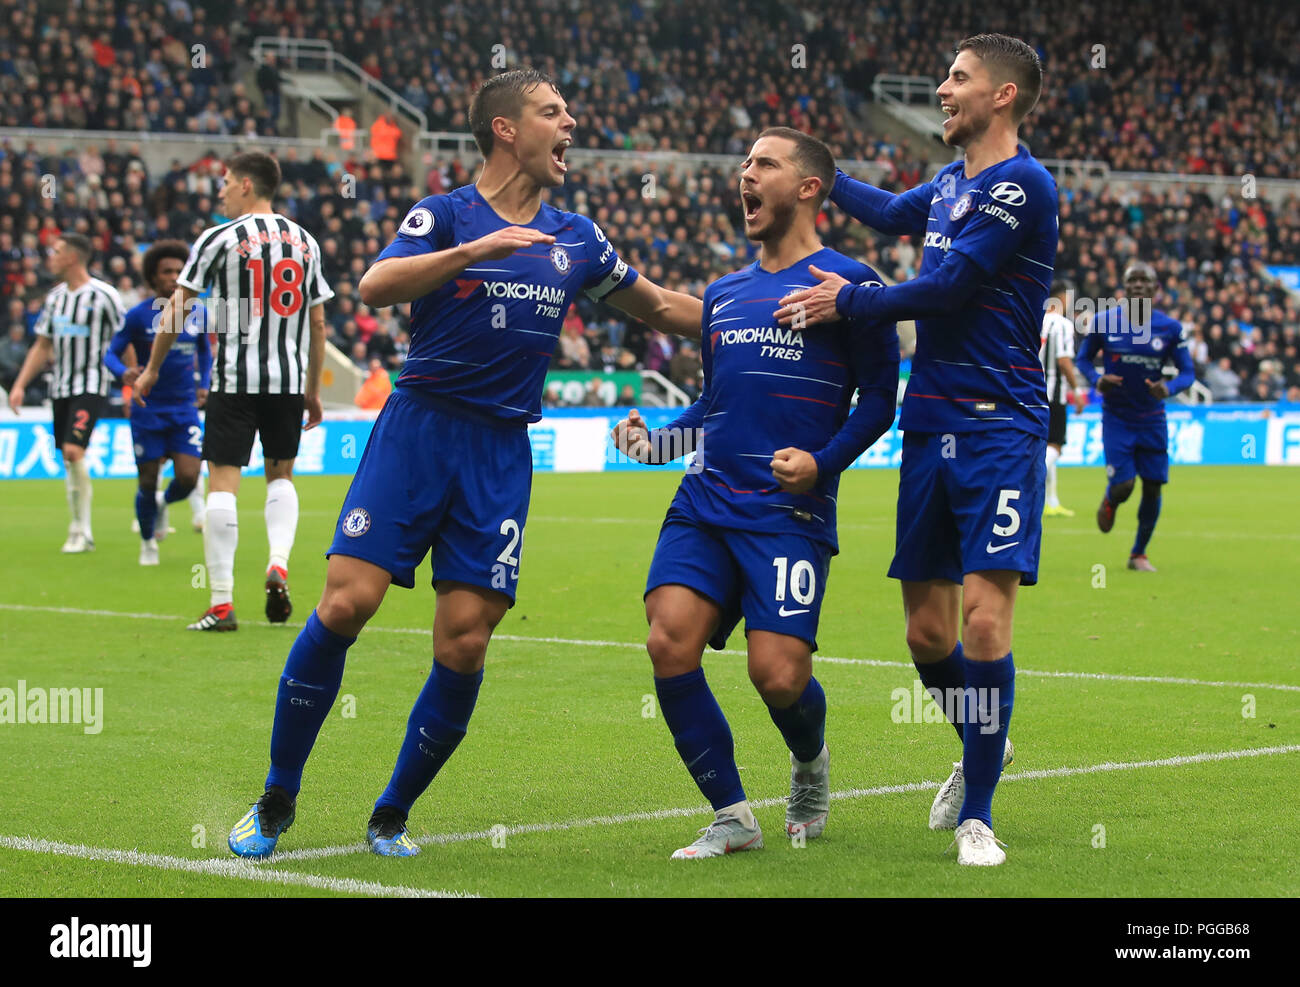 Chelsea's Eden Hazard (centre) celebrates scoring his side's first goal of the game with team-mates Cesar Azpilicueta (left) and Filho Jorge Jorginho during the Premier League match at St James' Park, Newcastle. PRESS ASSOCIATION Photo. Picture date: Sunday August 26, 2018. See PA story SOCCER Newcastle. Photo credit should read: Owen Humphreys/PA Wire. RESTRICTIONS: No use with unauthorised audio, video, data, fixture lists, club/league logos or 'live' services. Online in-match use limited to 120 images, no video emulation. No use in betting, games or single club/league/pla Stock Photo